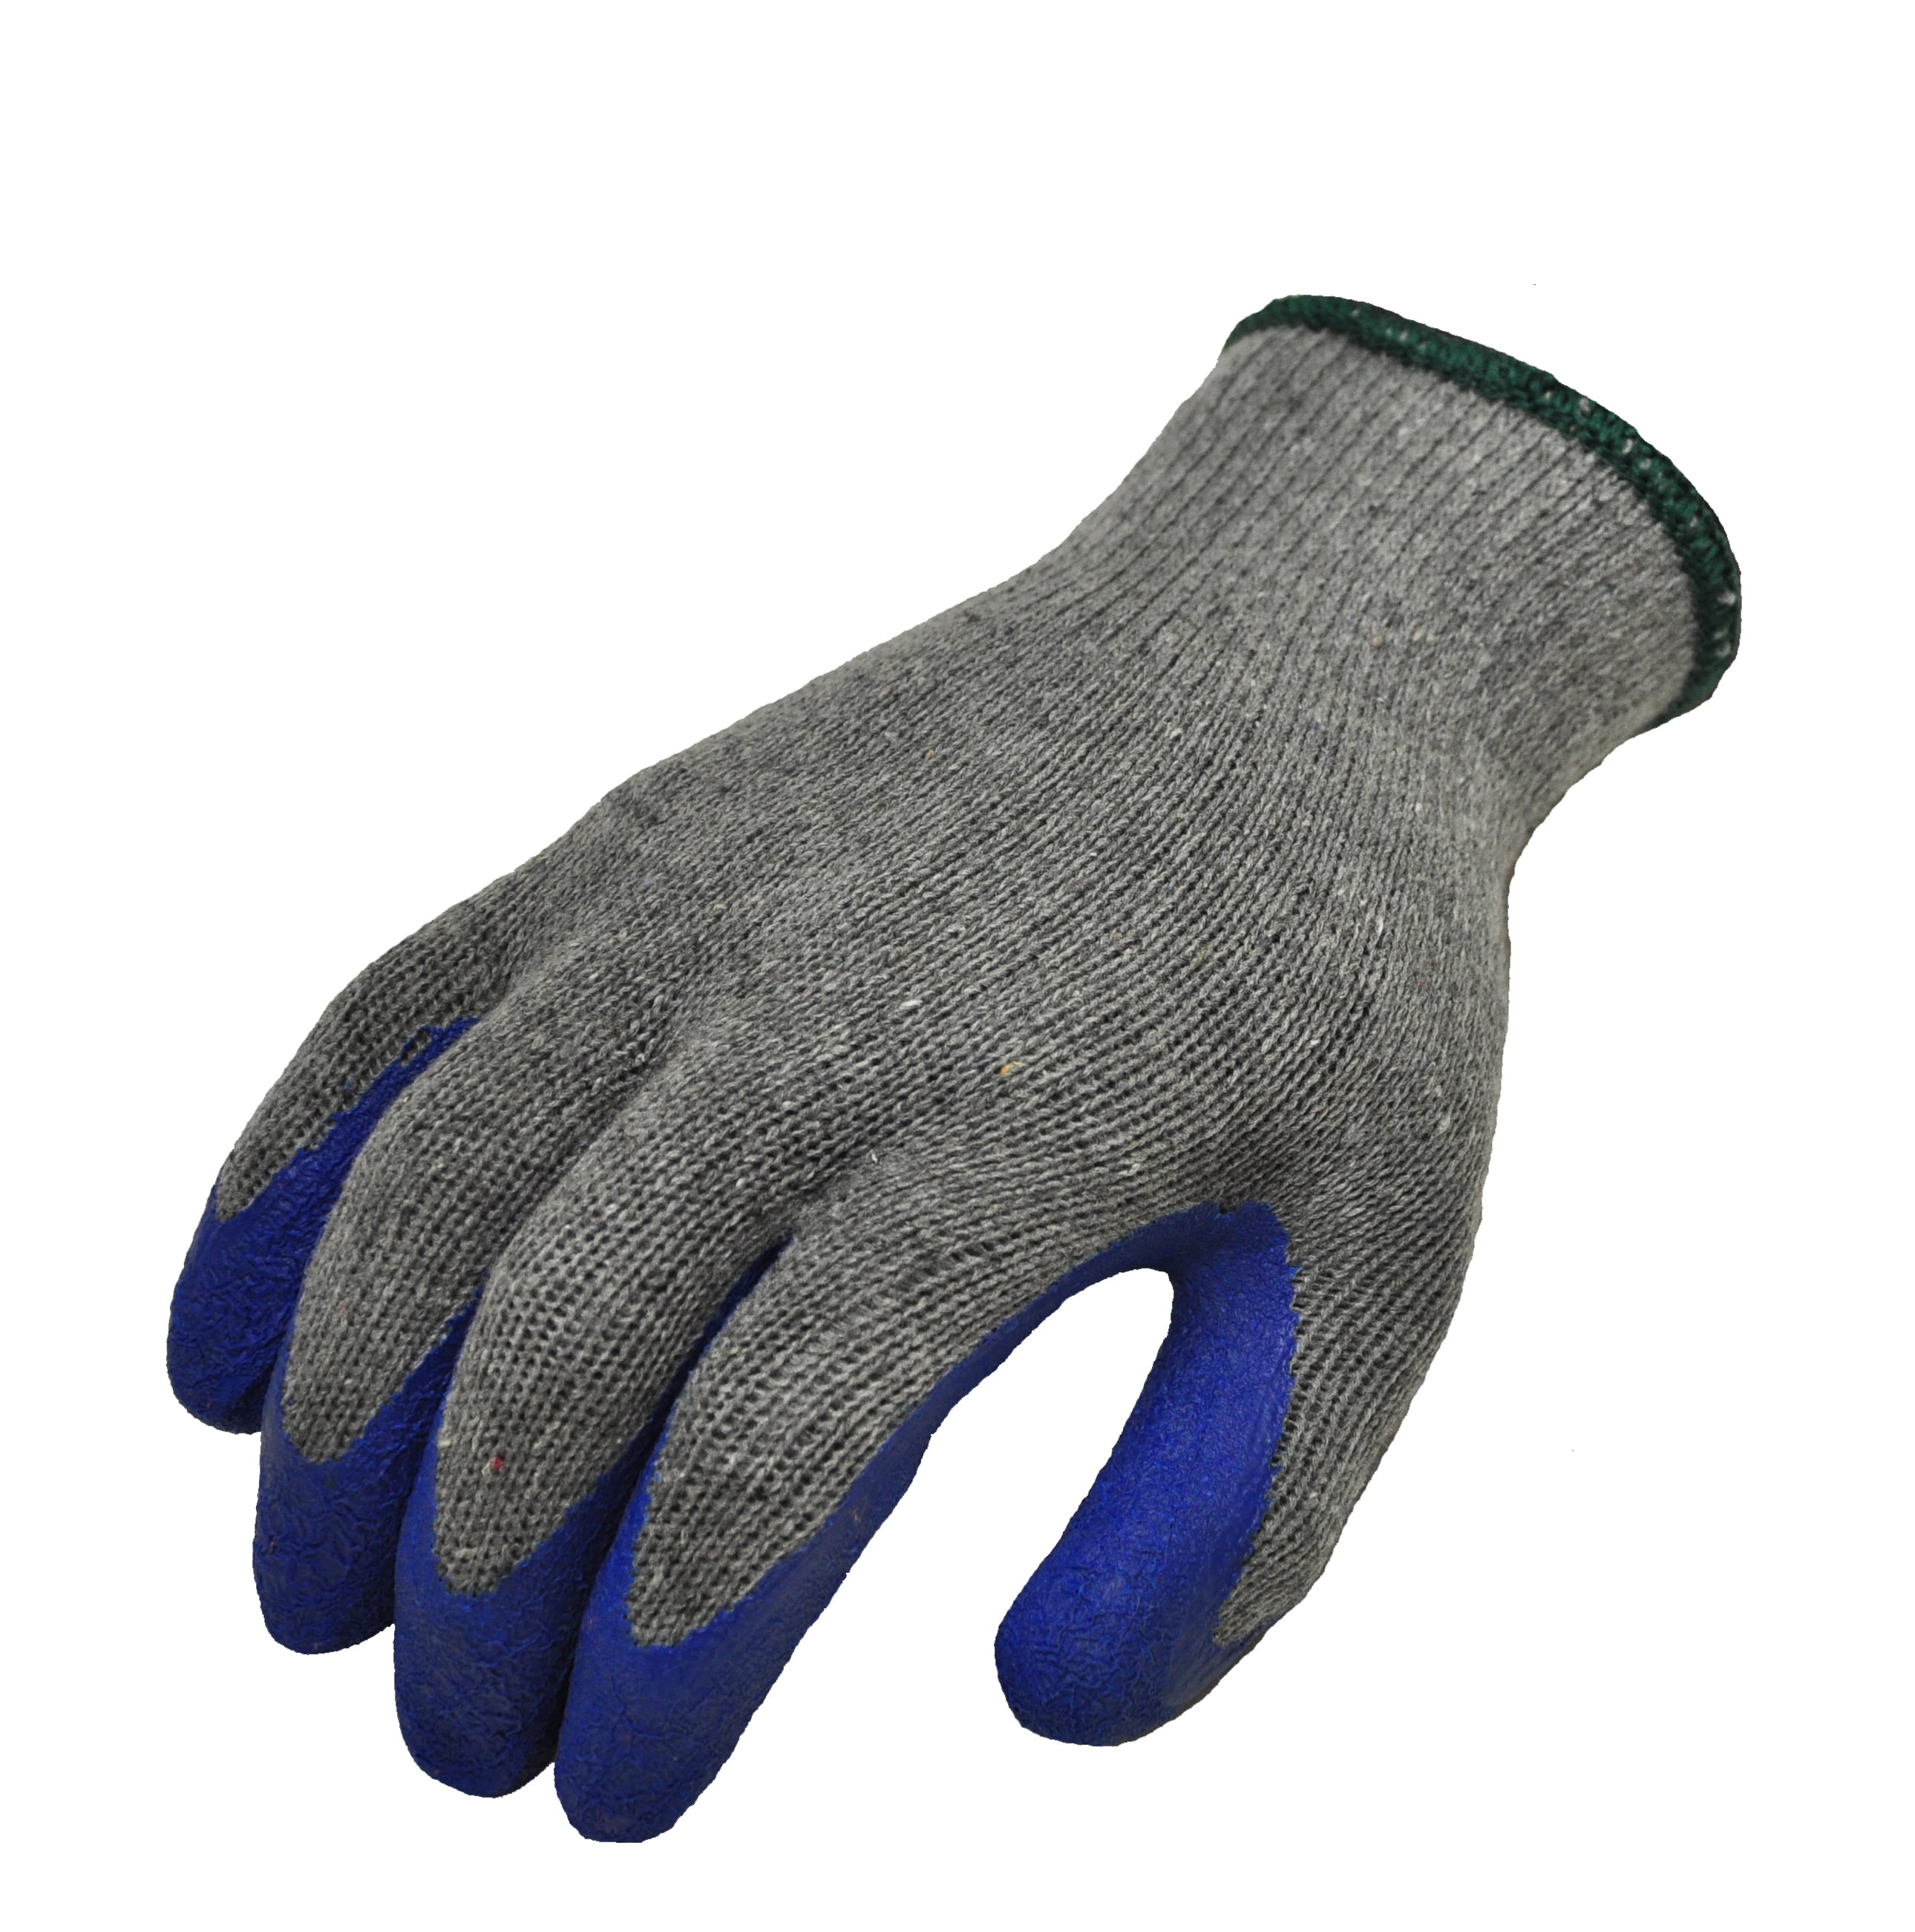 Best 3100M DZ Knit Work Gloves With Textured Rubber Latex Coated 12 Pas for sale online 